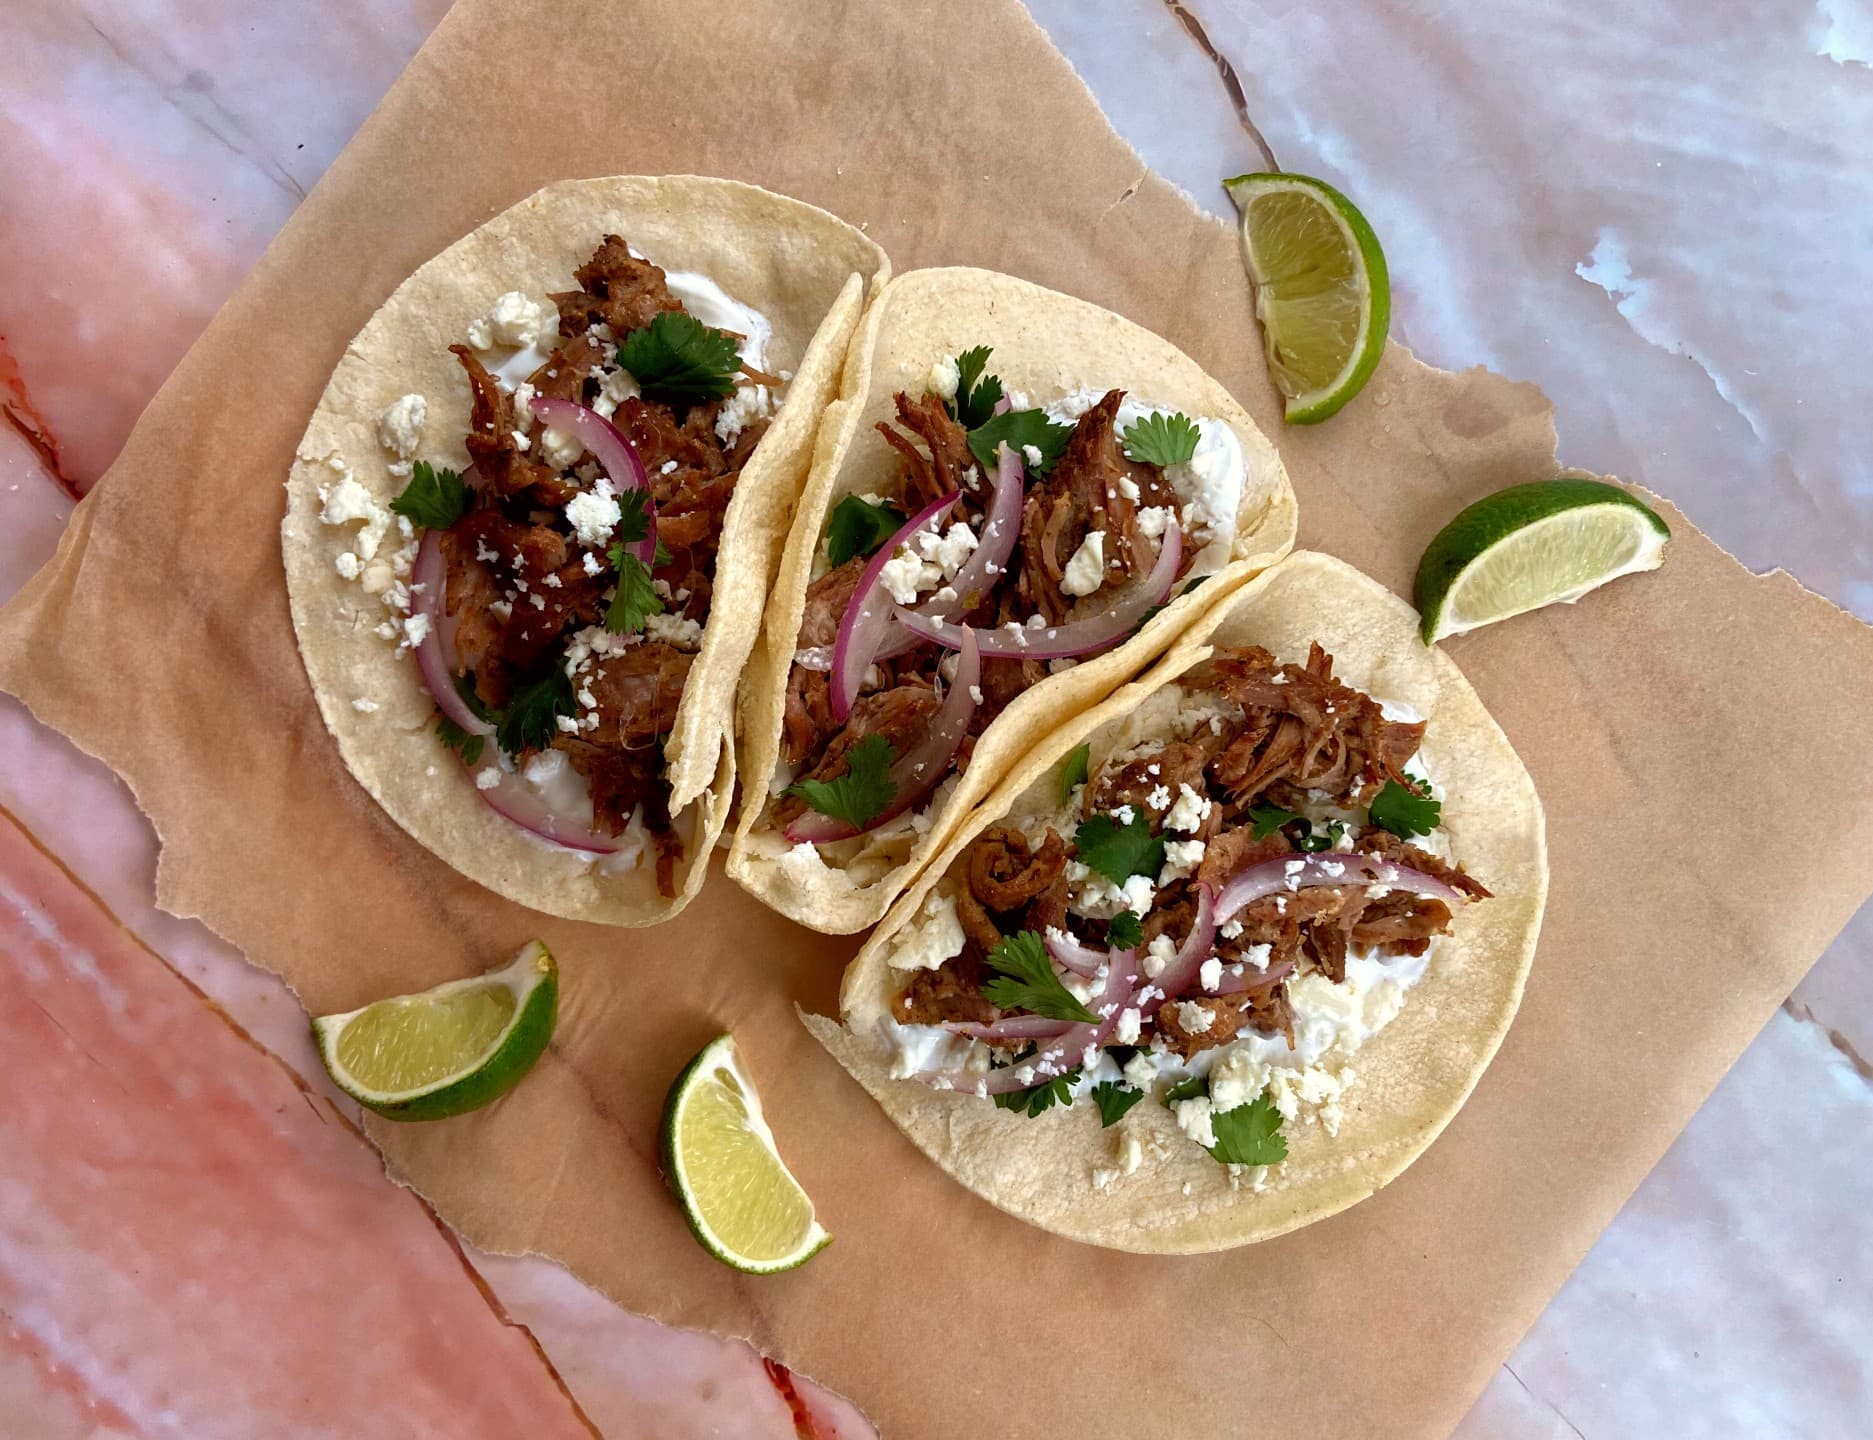 on the lamb tacos